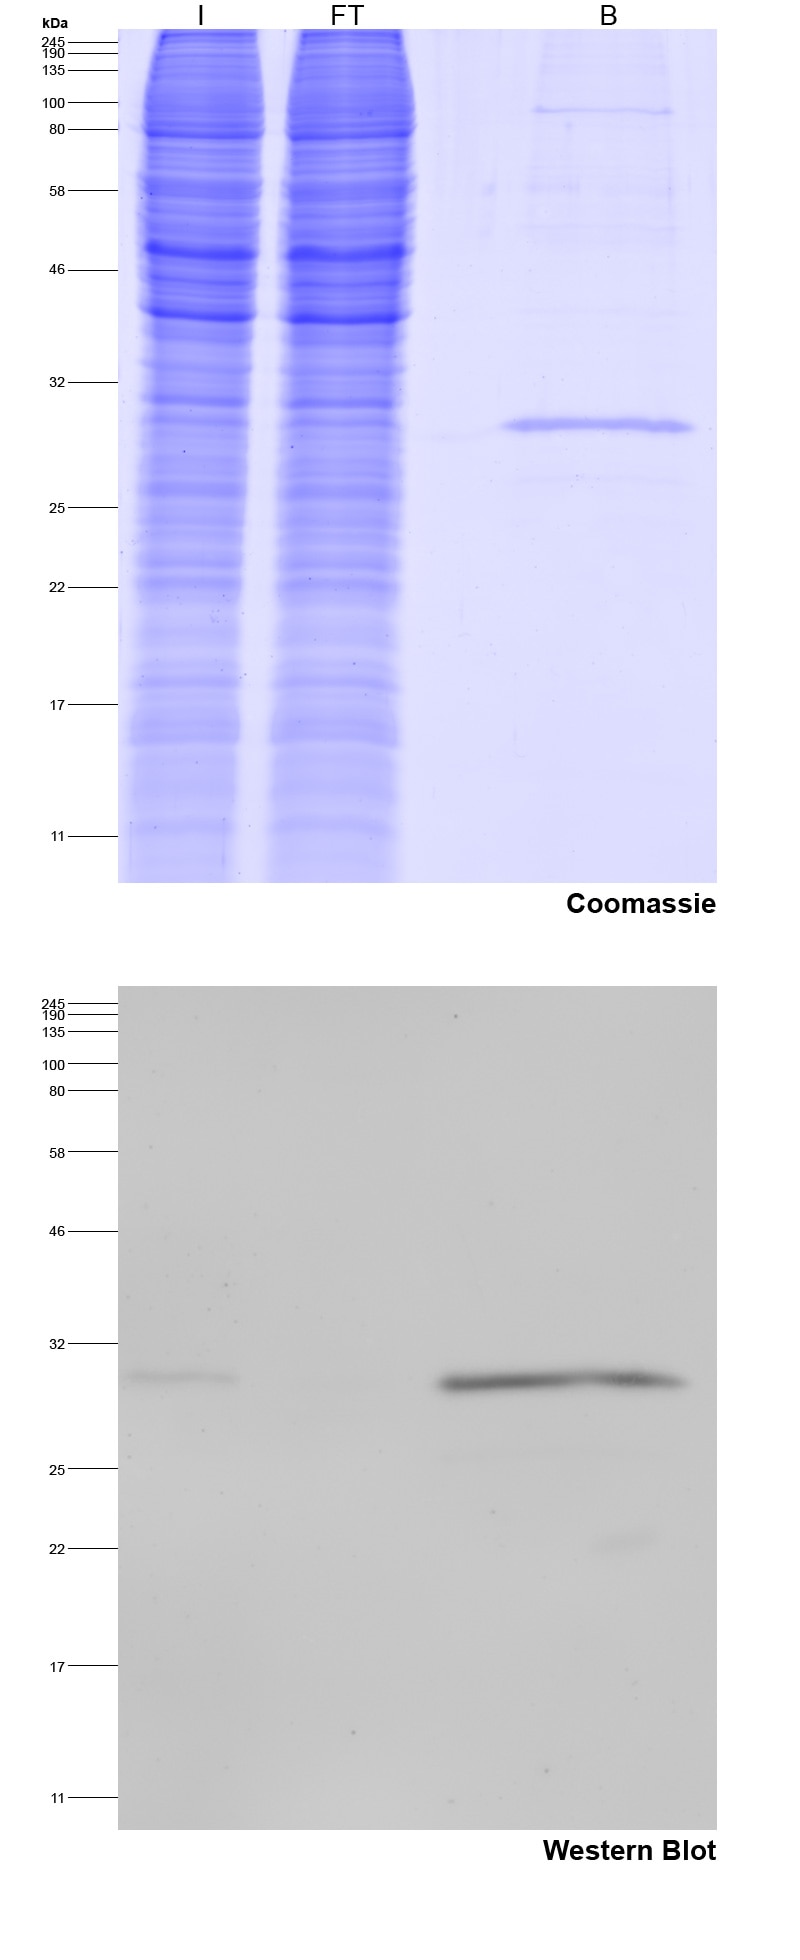 Spot-Trap Magnetic Agarose for immunoprecipitation of Spot-tagged proteins: Coomassie blue stained gel and Western blot I: Input, FT: Flow-Through, B: Bound.